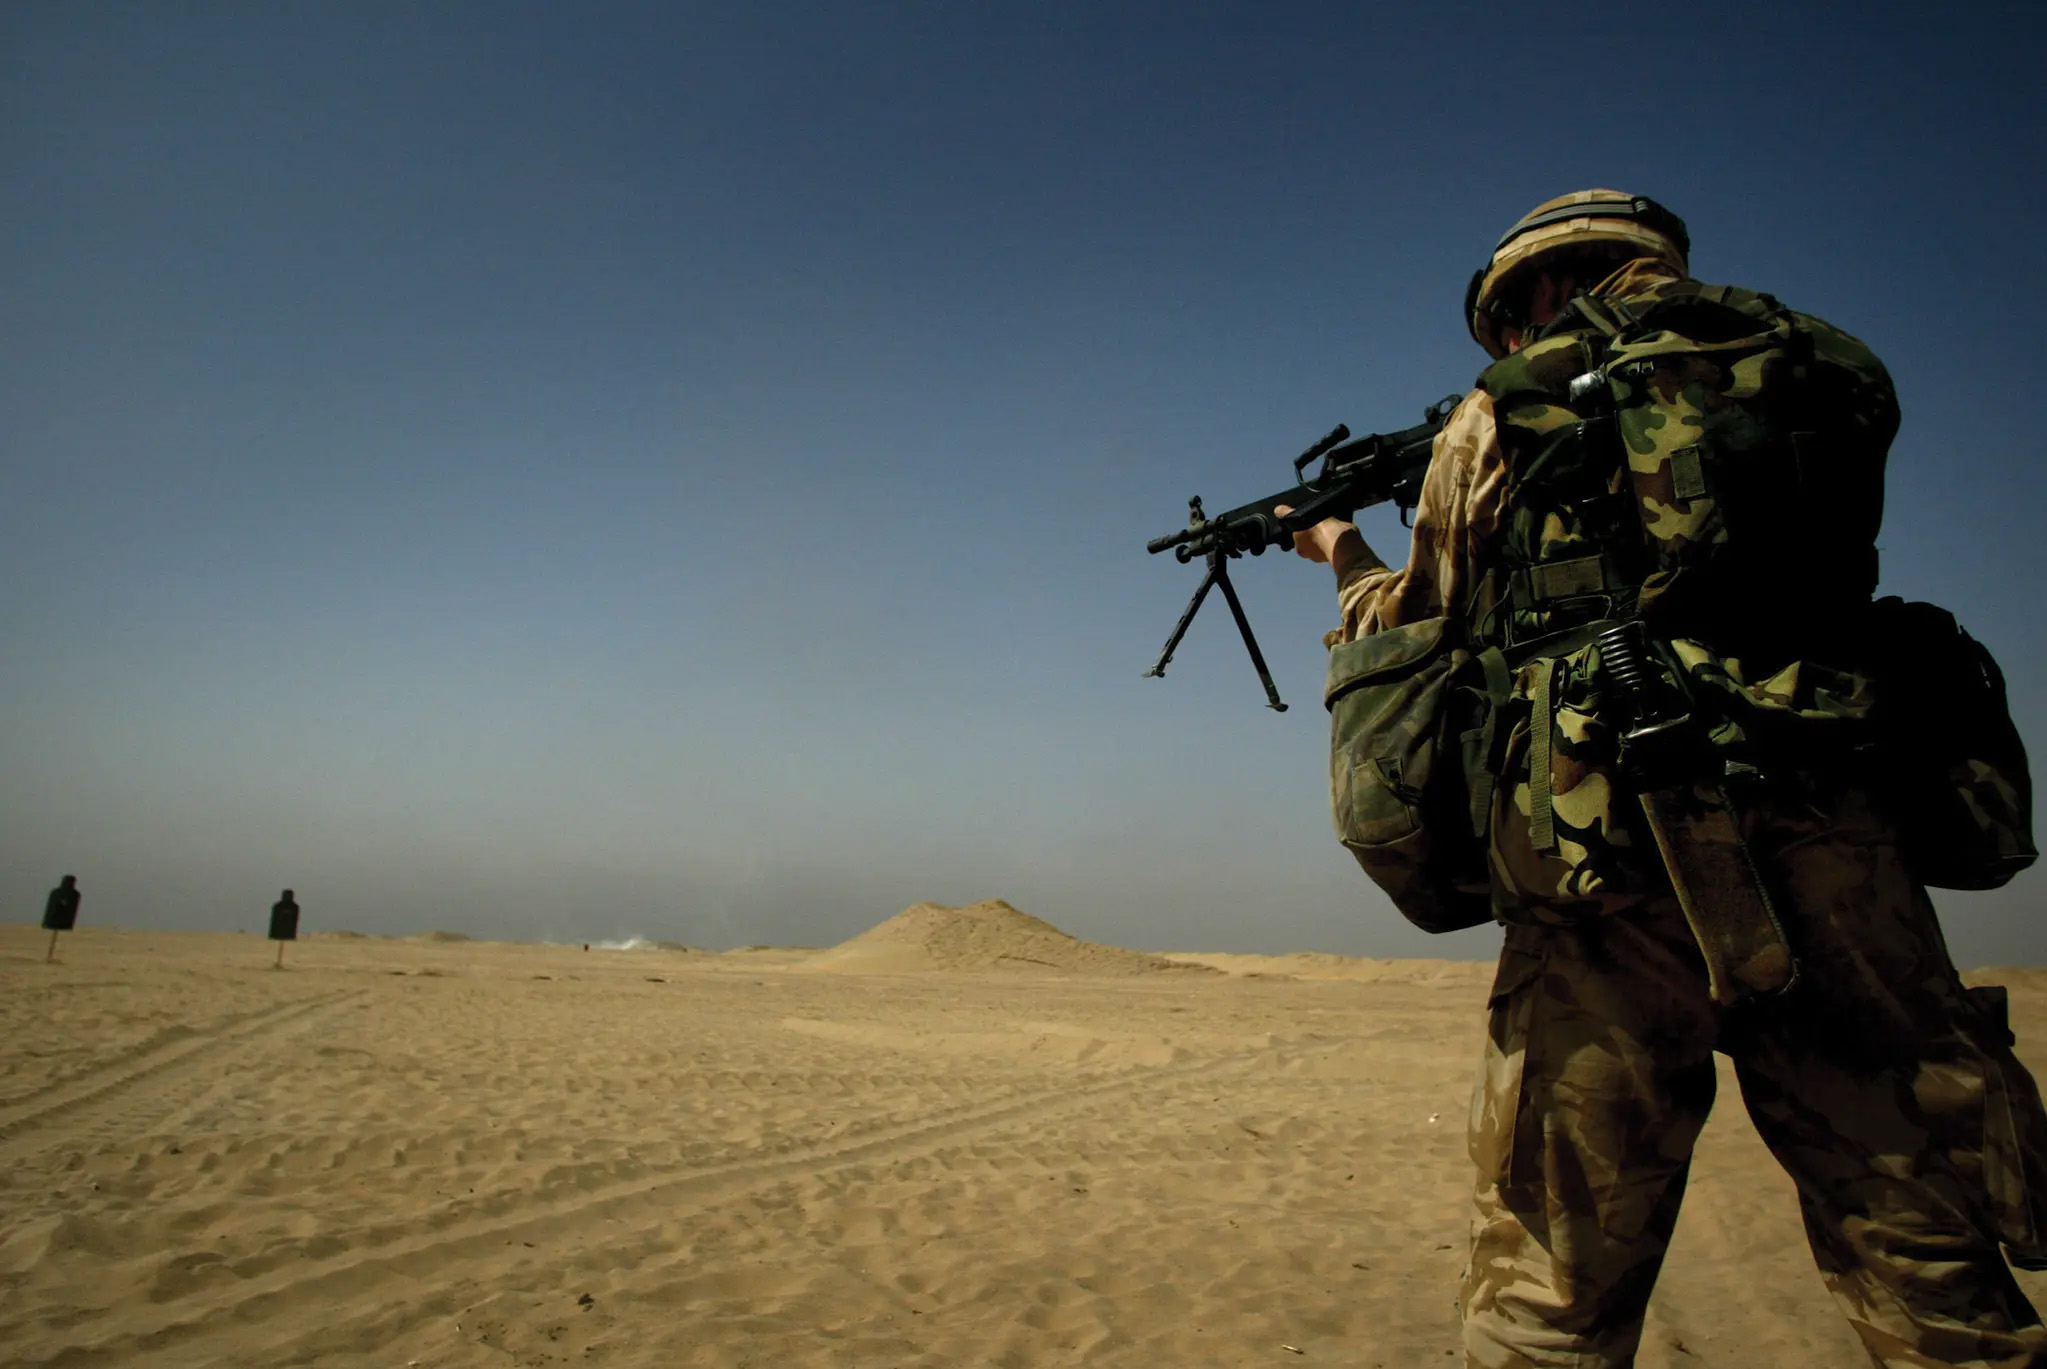 A 3rd Infantry Division soldier trains at the Udari Range Complex in Kuwait